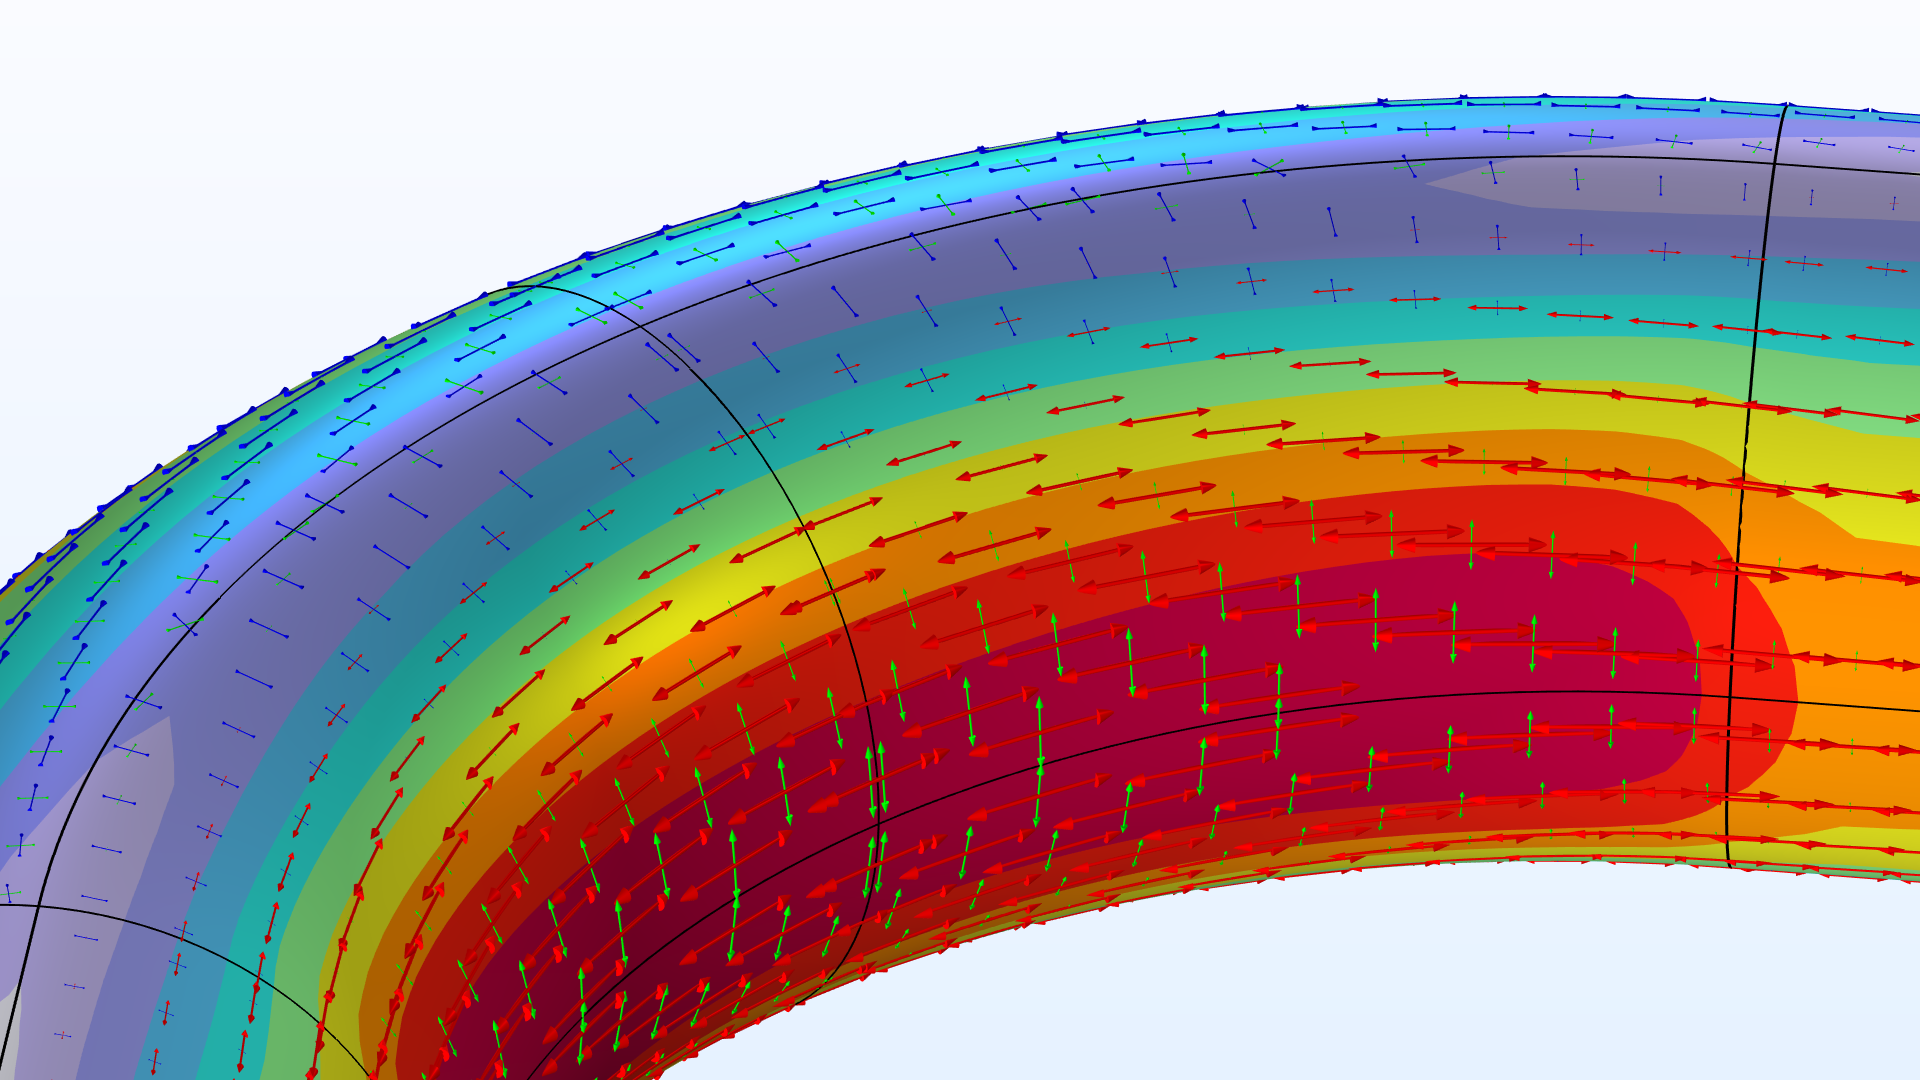 A close-up view of the pipe bend showing the Von Mises stress and principal stresses for a wall thickness of 35 percent.